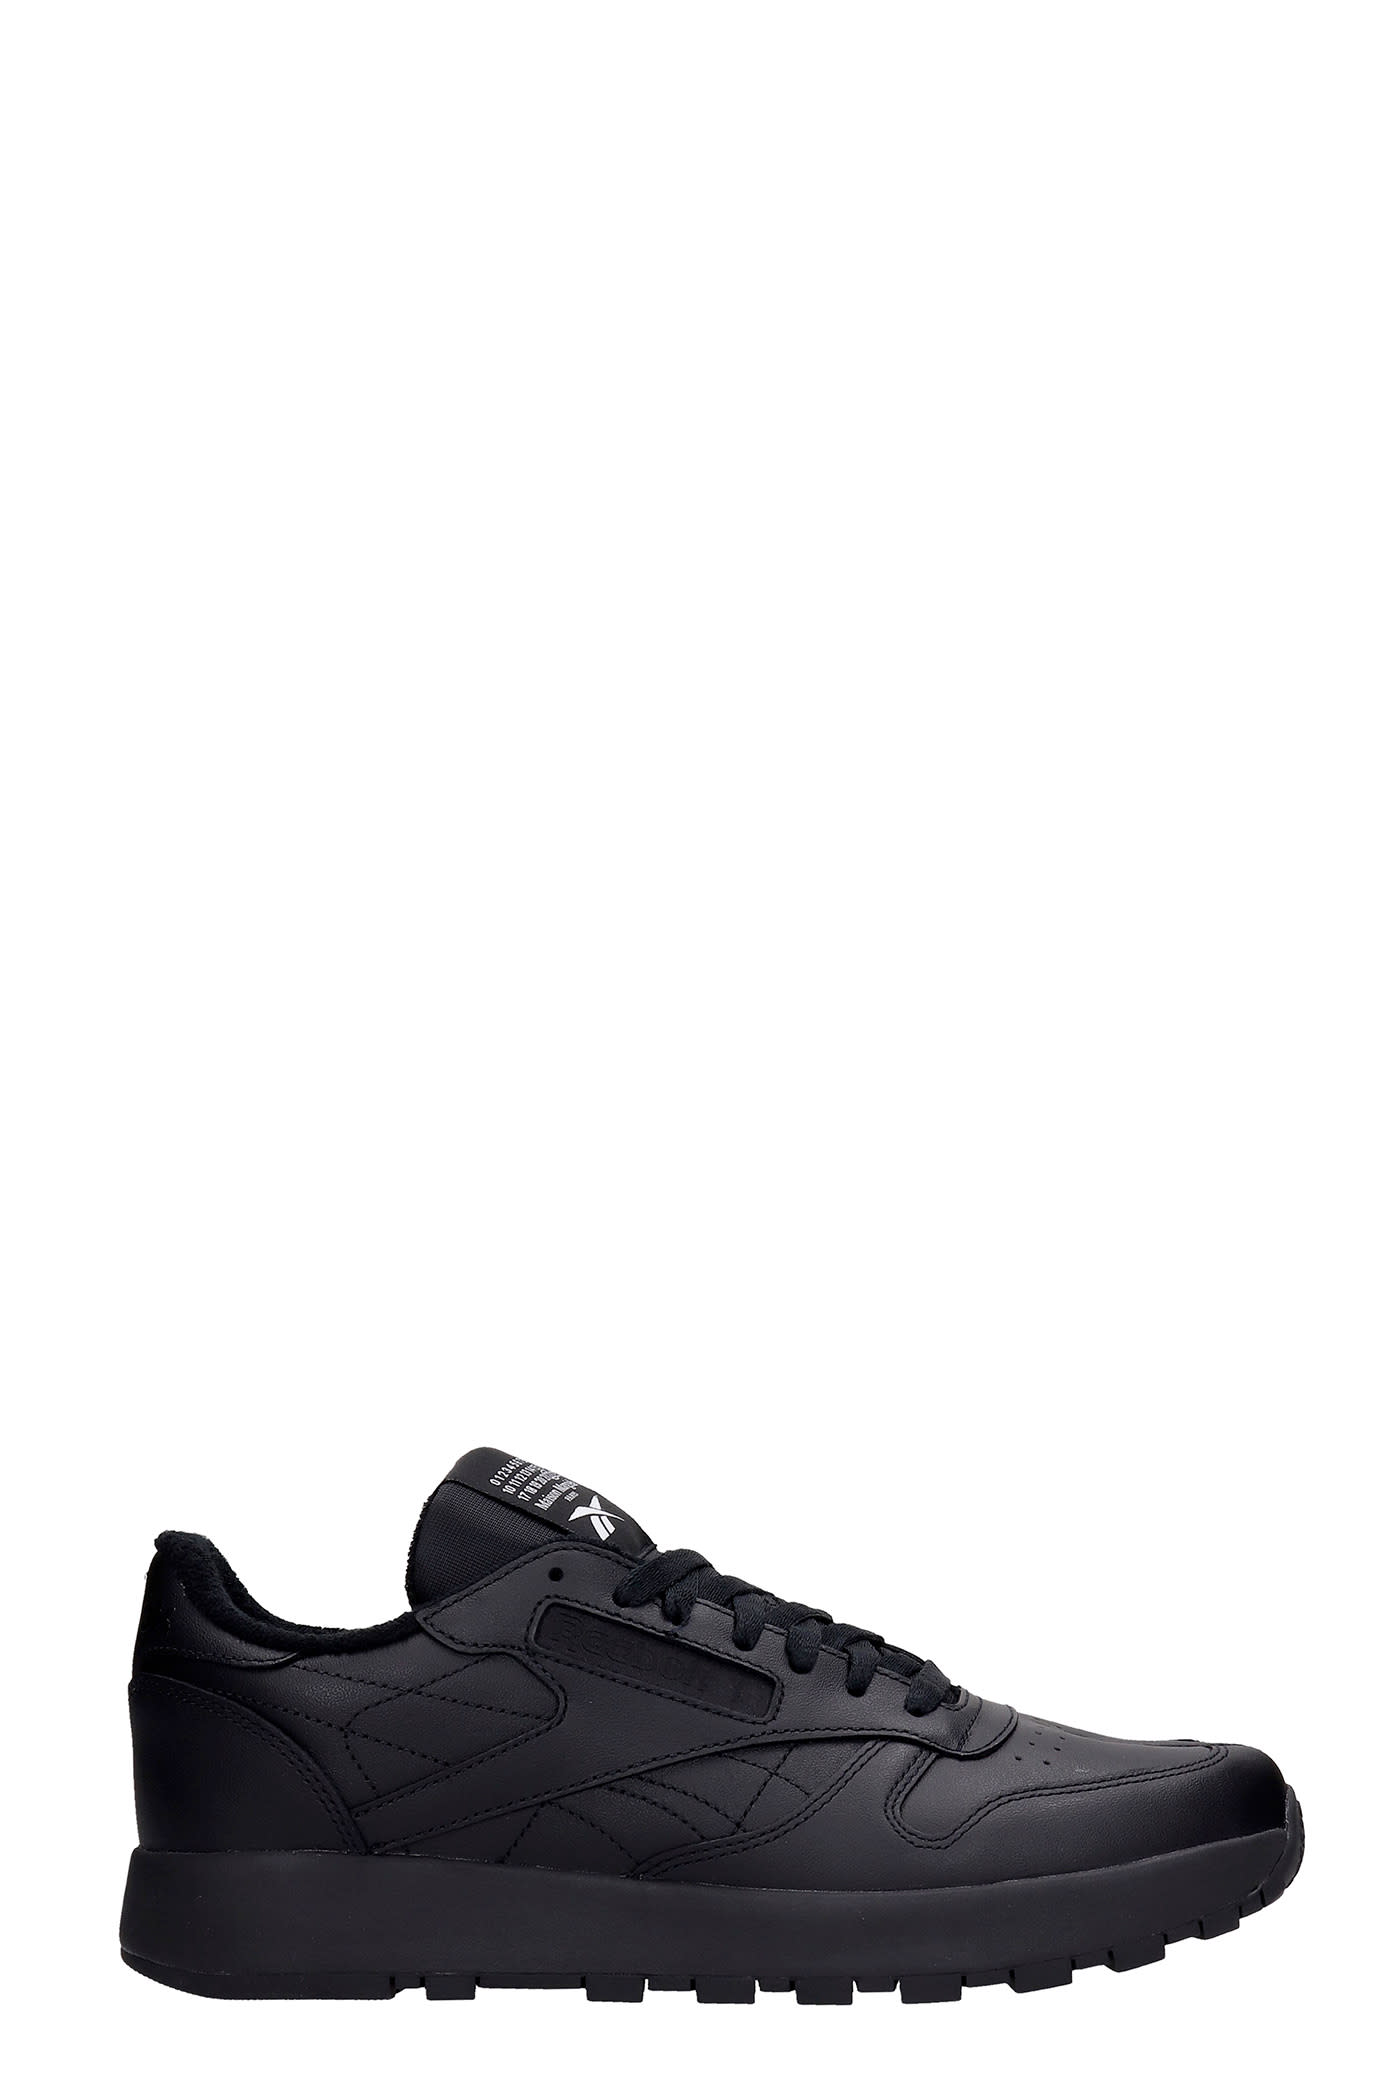 Maison Margiela Project 0 Cl Sneakers In Black Leather